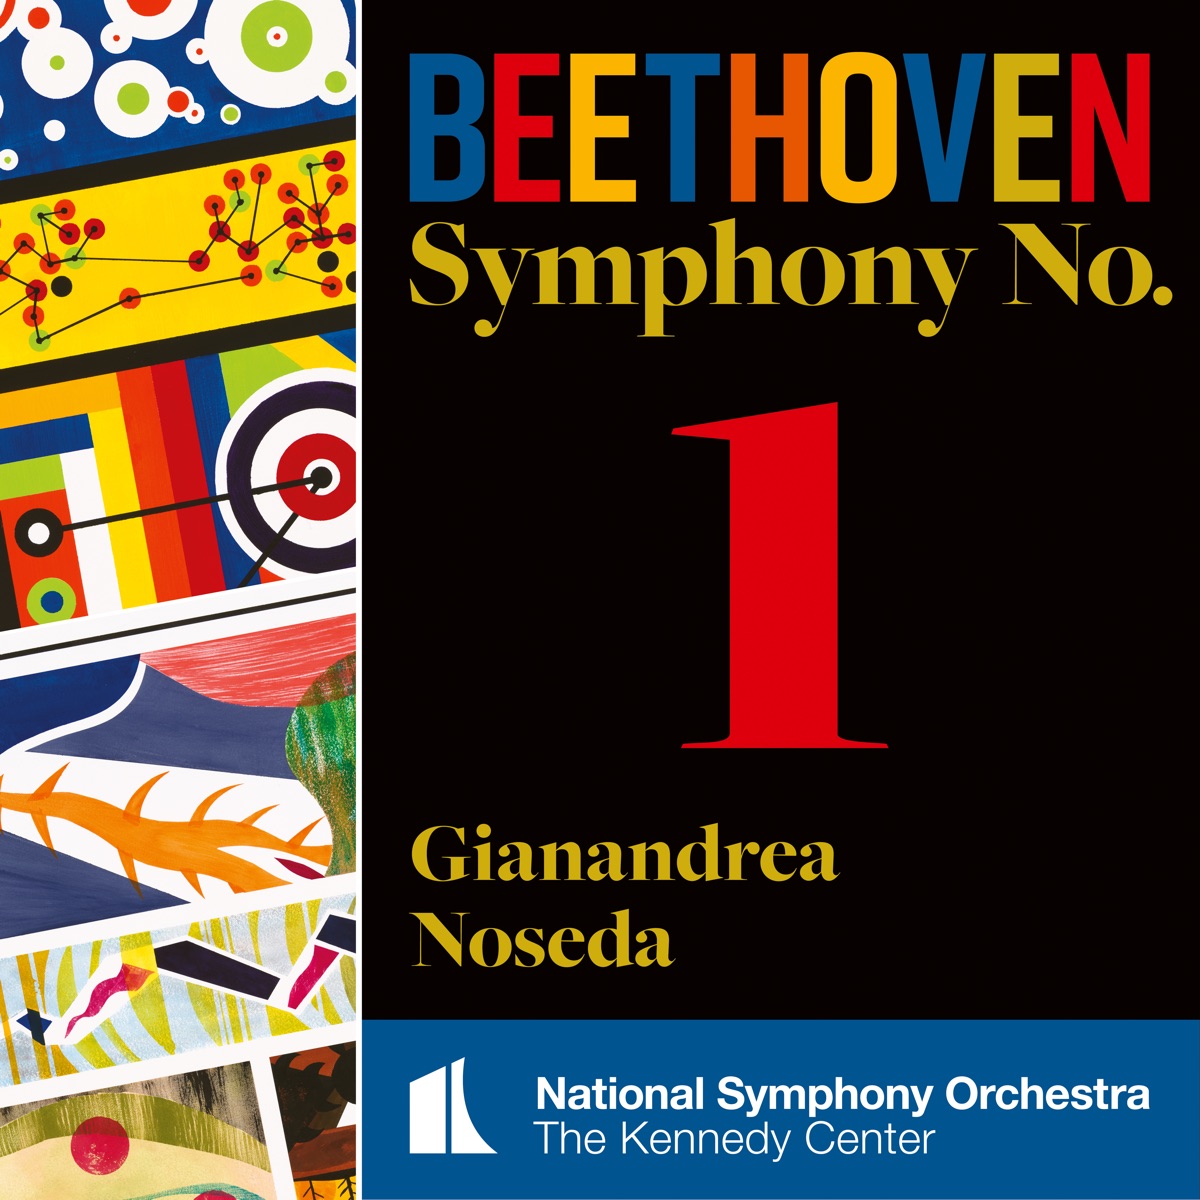 Beethoven: Symphony No. 1 (Live) - Album by National Symphony Orchestra,  Kennedy Center & Gianandrea Noseda - Apple Music